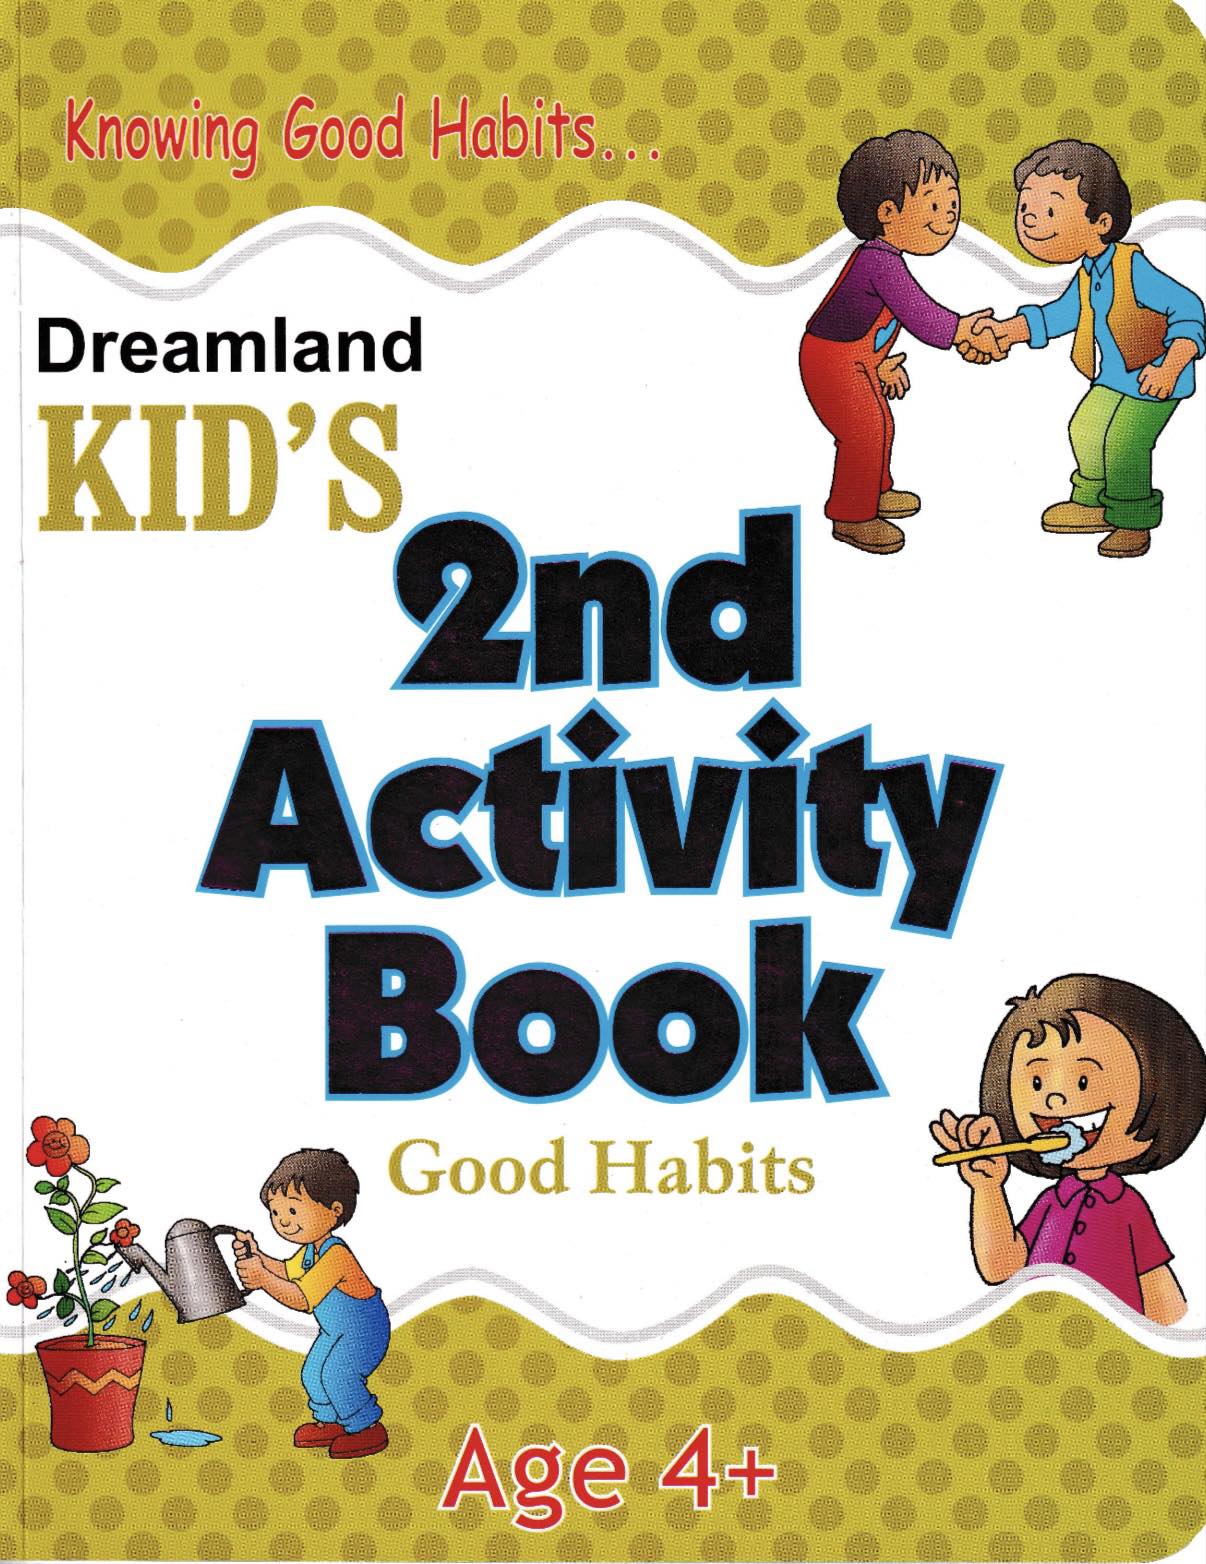 Dreamland Kid's 2nd Activity Book for Age 4+